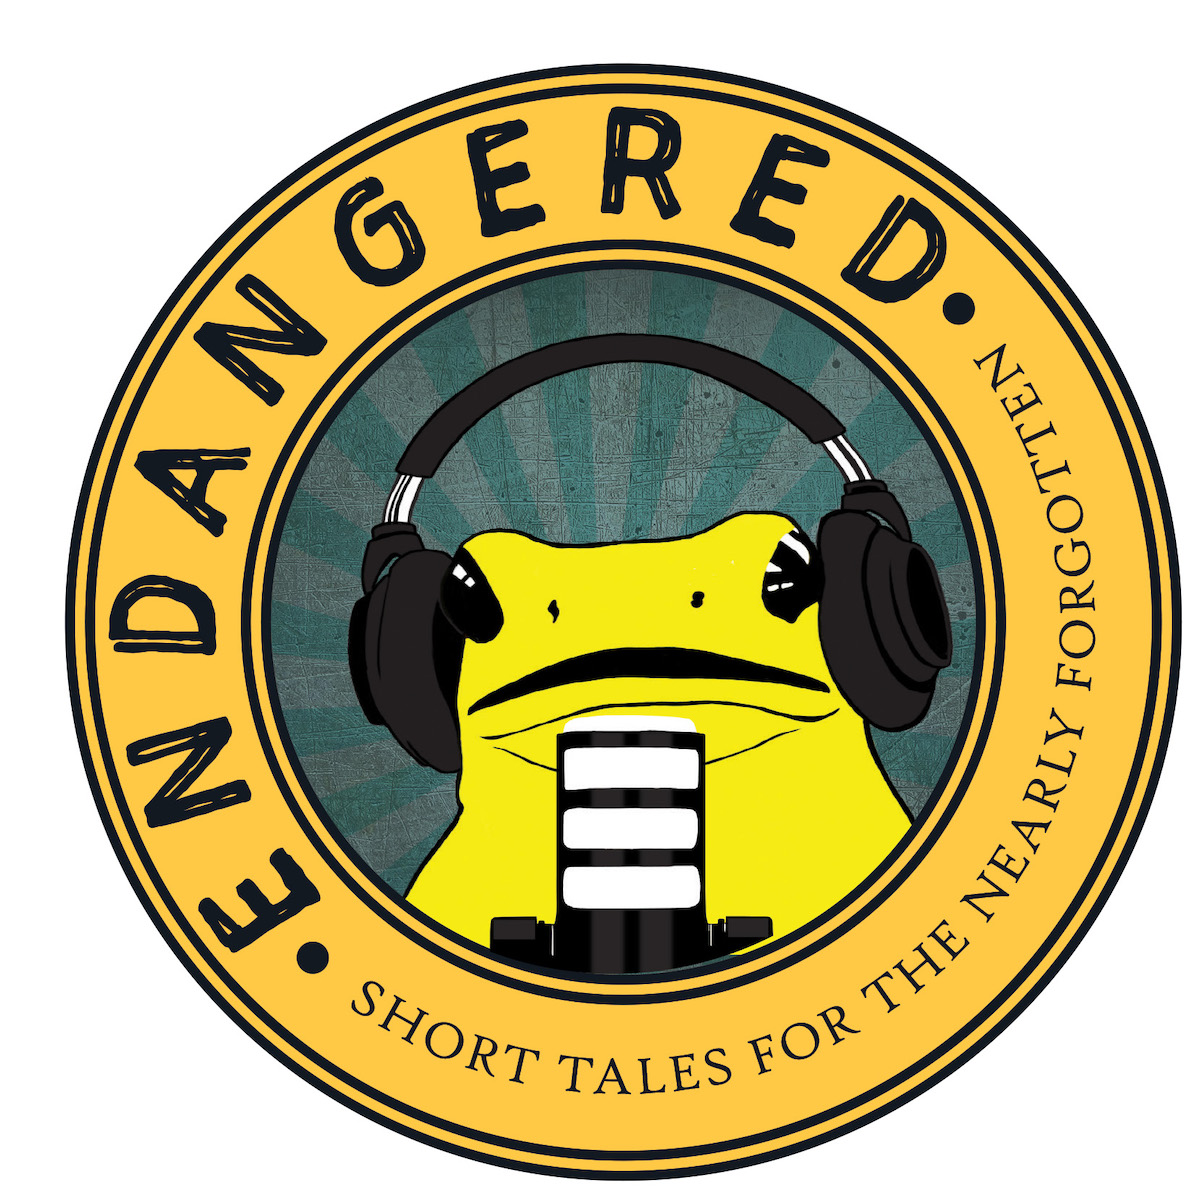 Endangered: Short Tales for the Nearly Forgotten